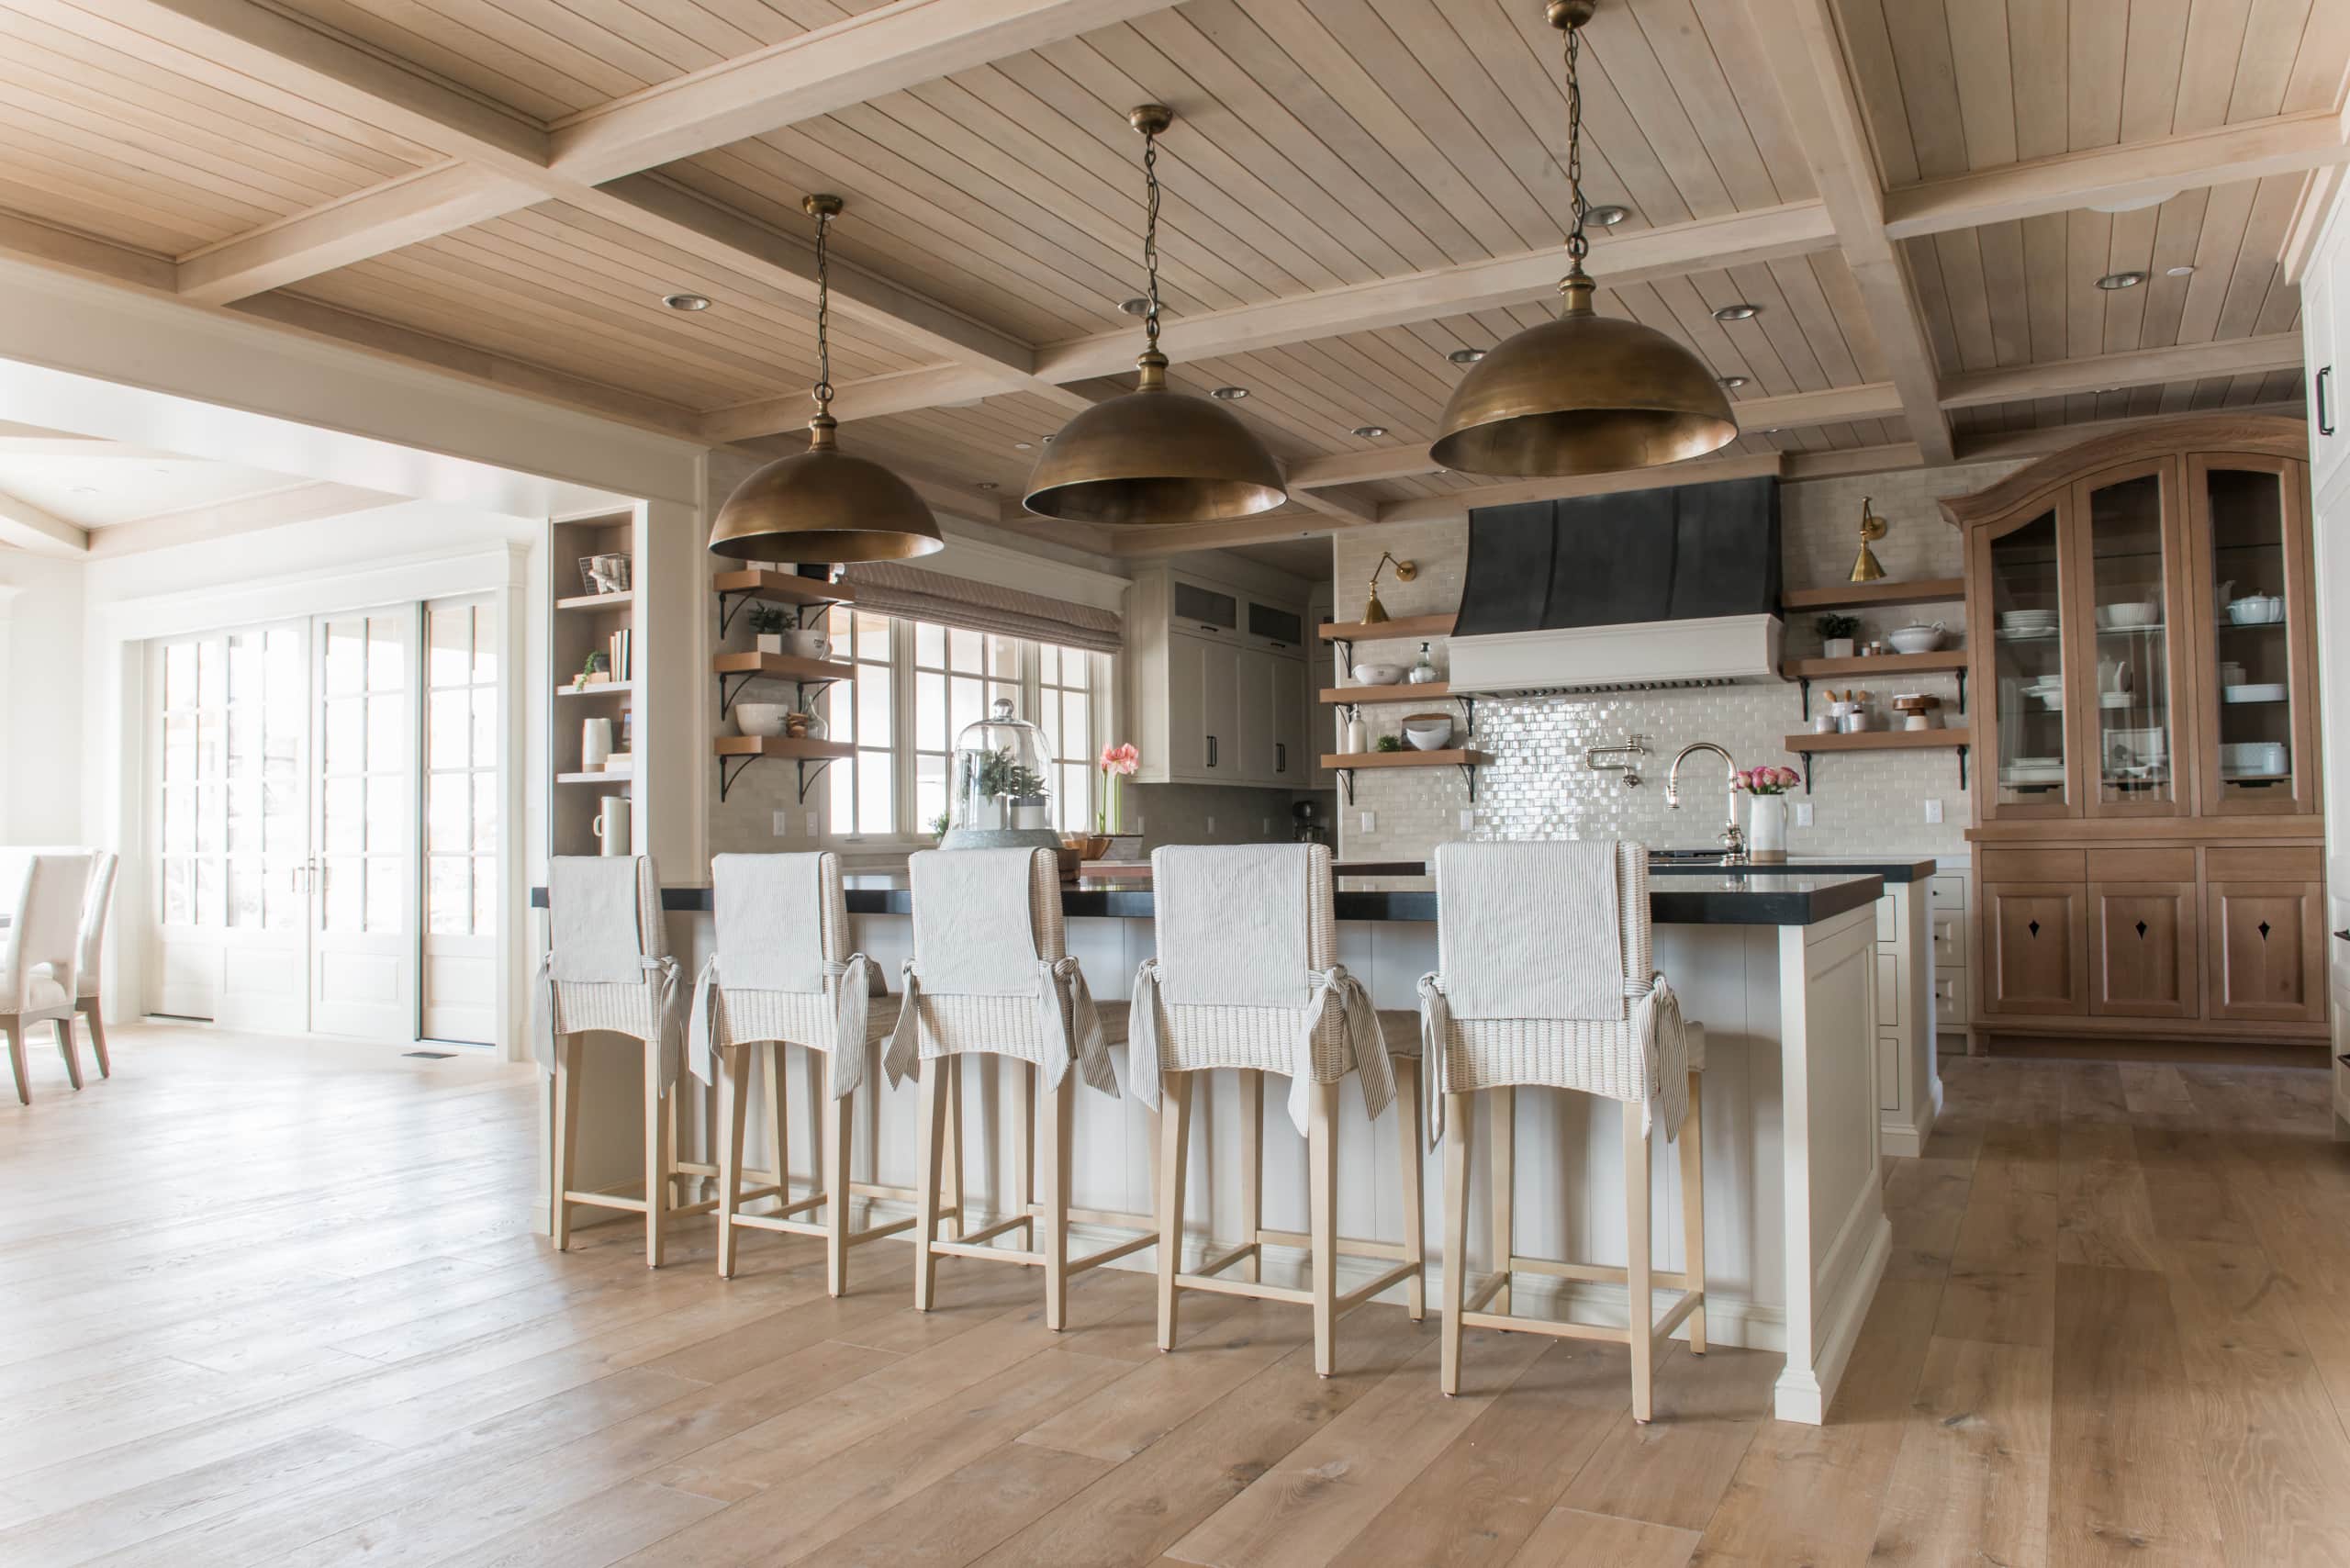 European style home tour kitchen featuring kitchen island, pendant lights and bar stools